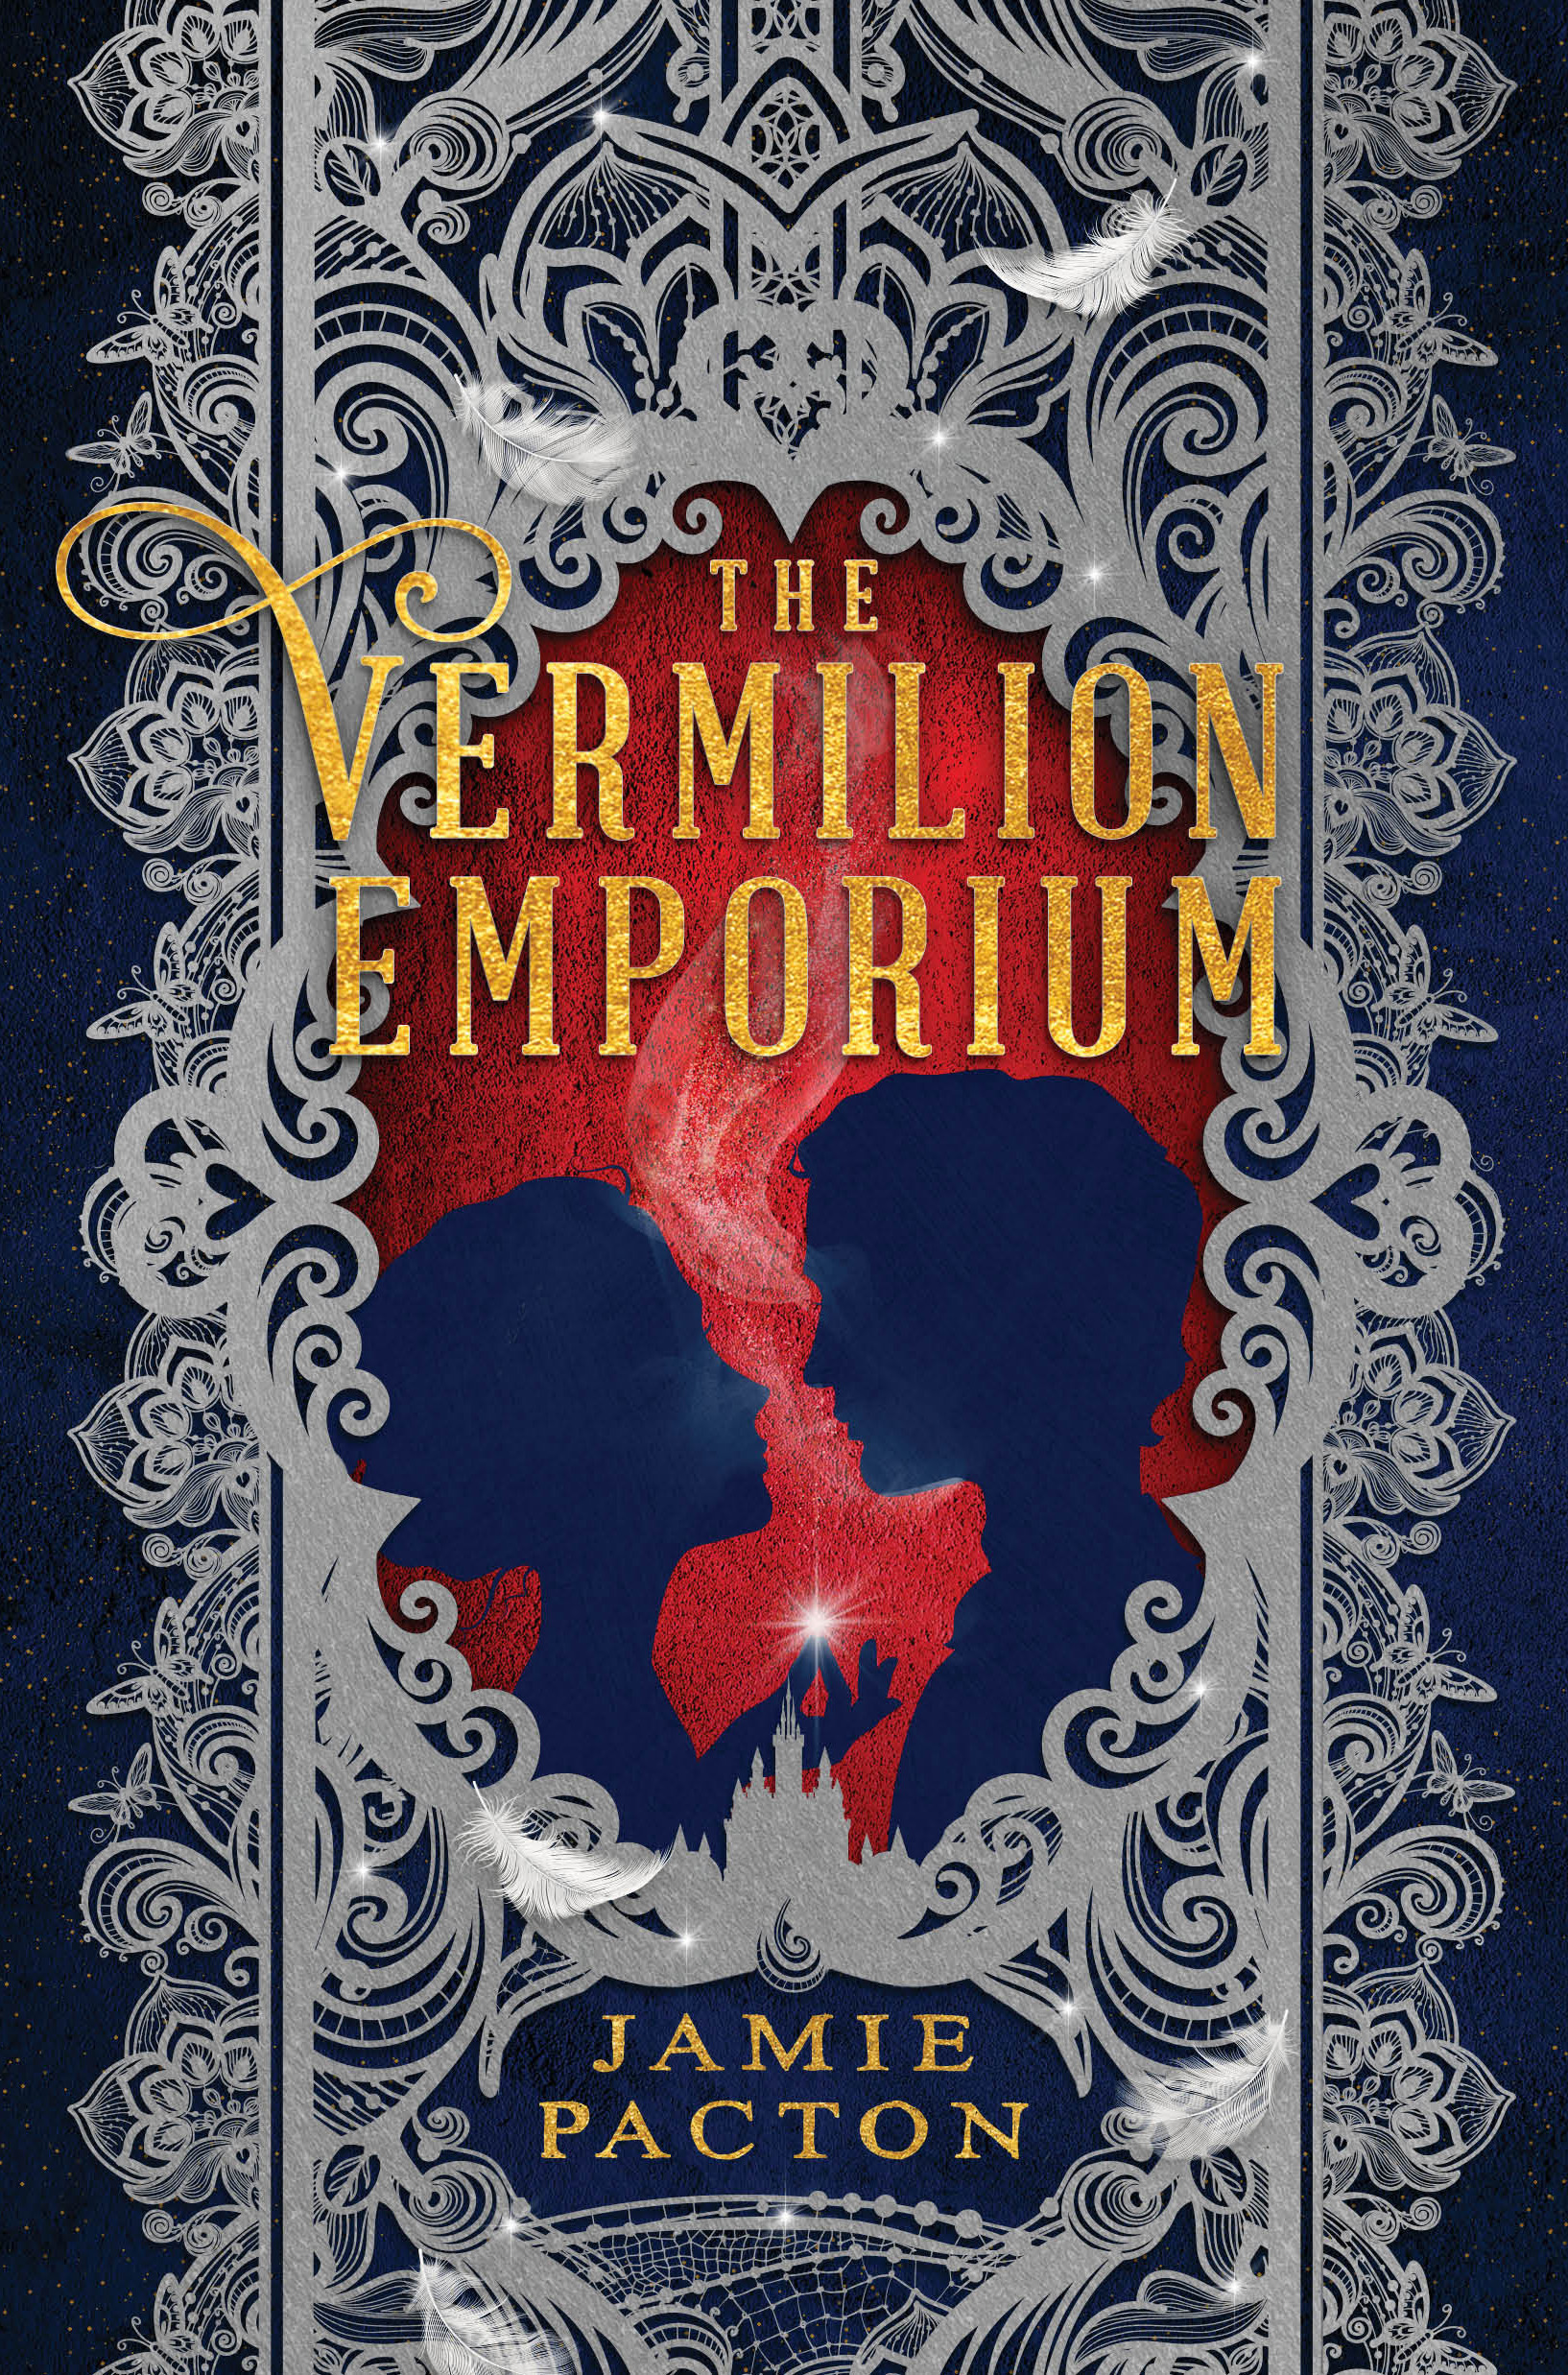 Cover of The Vermilion Emporium, featuring silhouettes of a woman and man looking at each other surrounded by a fancy frame